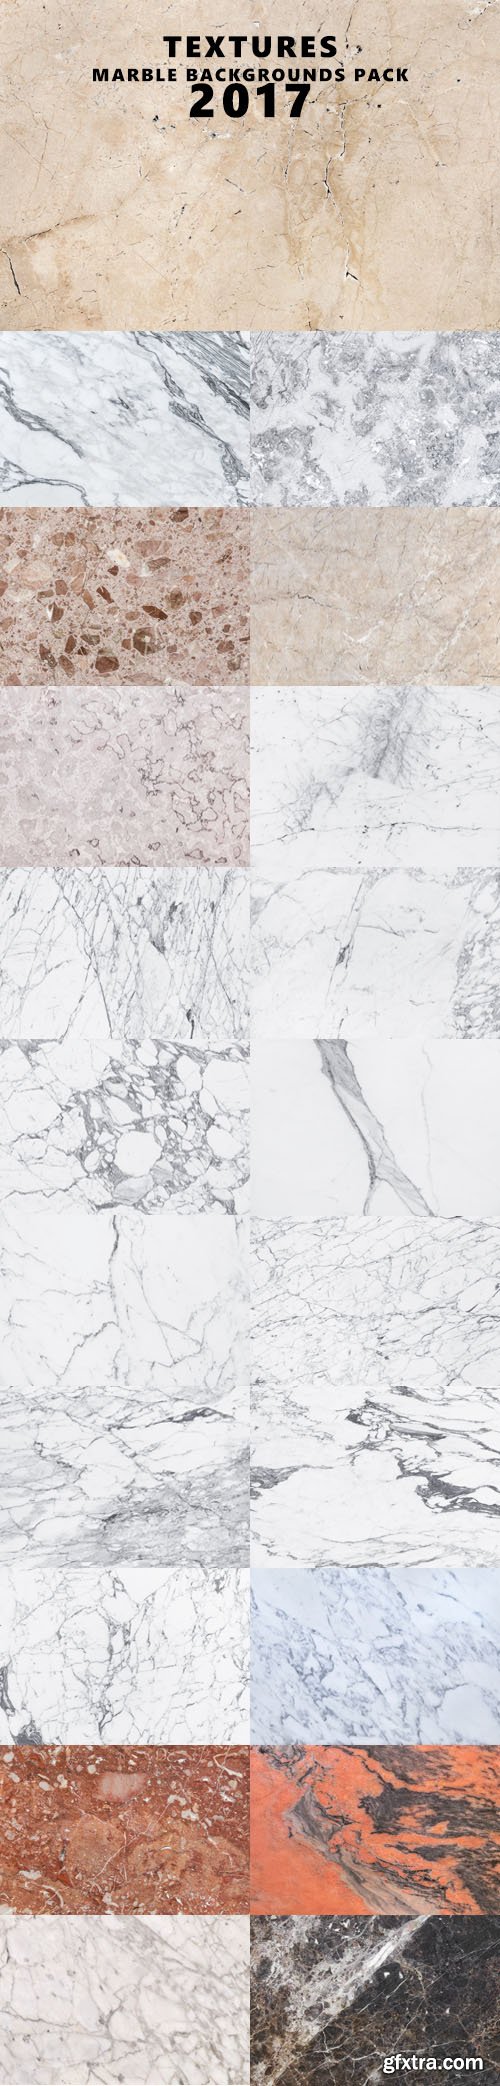 Textures - Marble Backgrounds Pack 2017